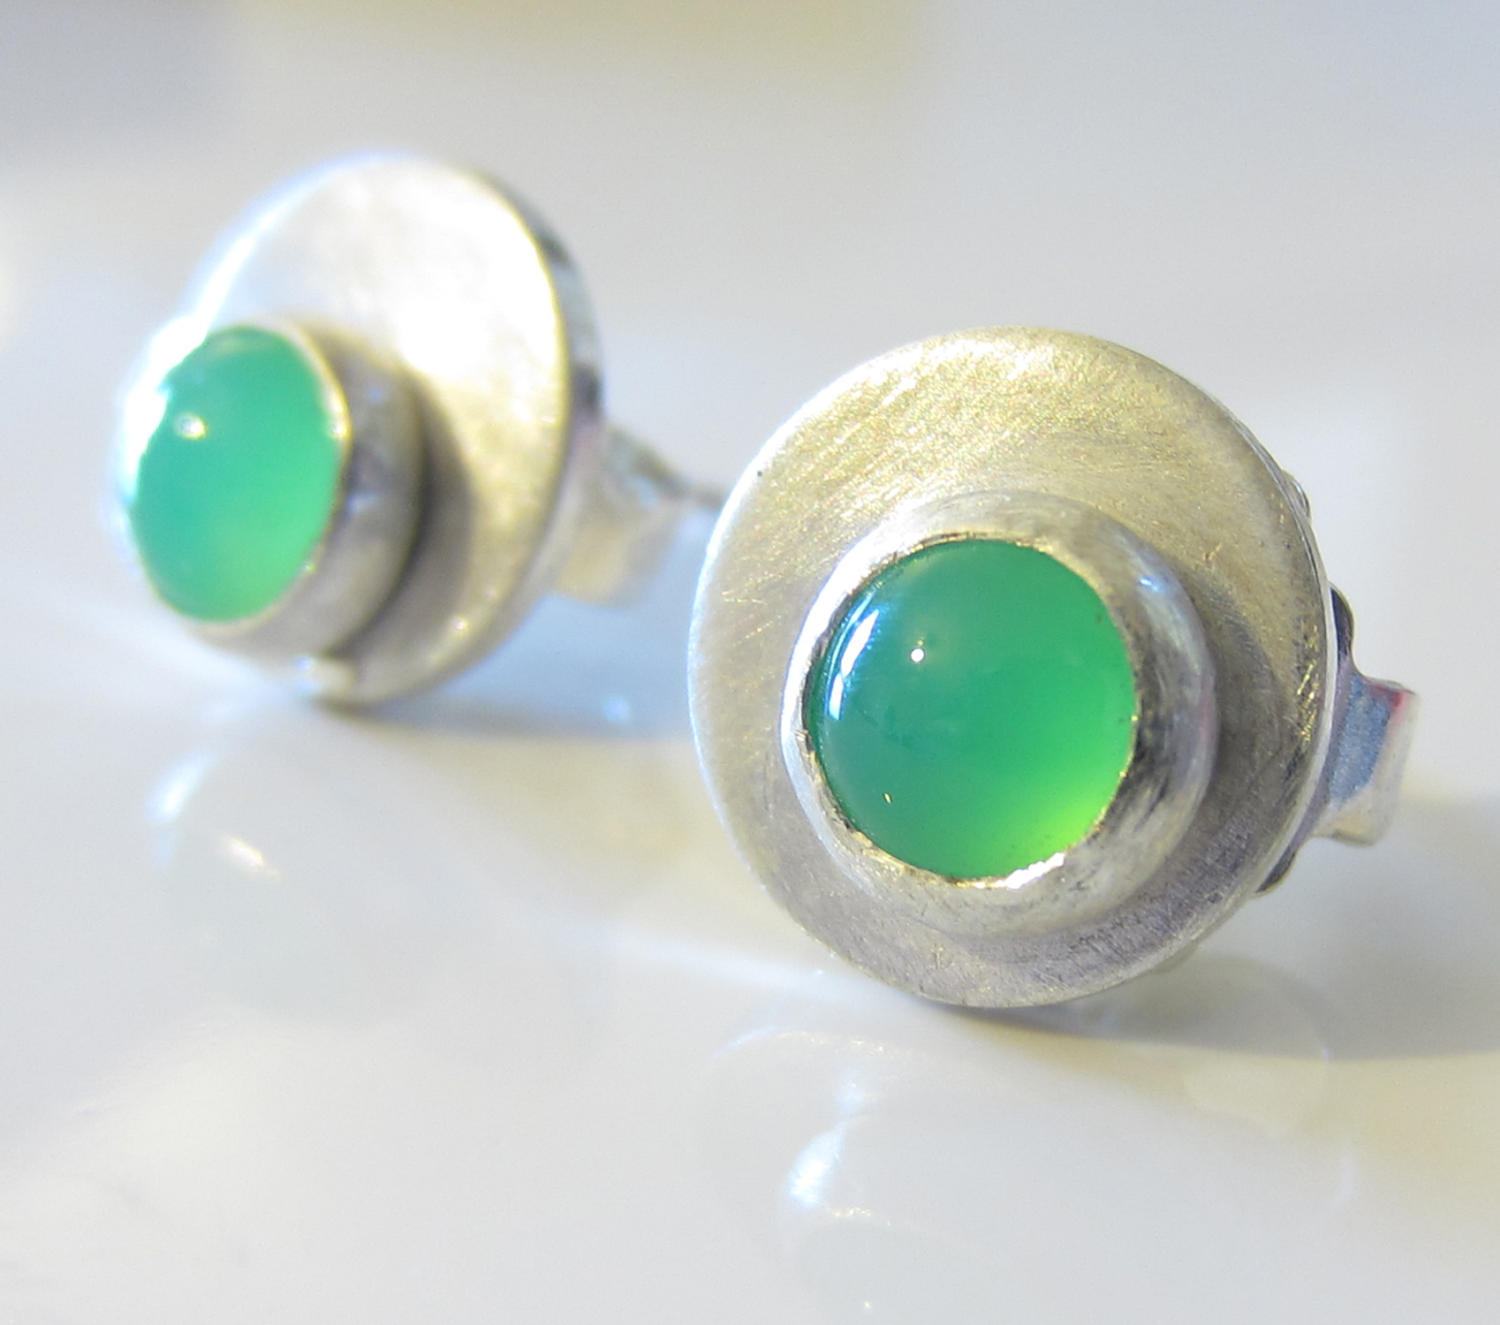 Green Chrysoprase earrings - Dotty Round stud Earrings in sterling silver with mint green chrysoprase gemstone cabochons - round ear studs